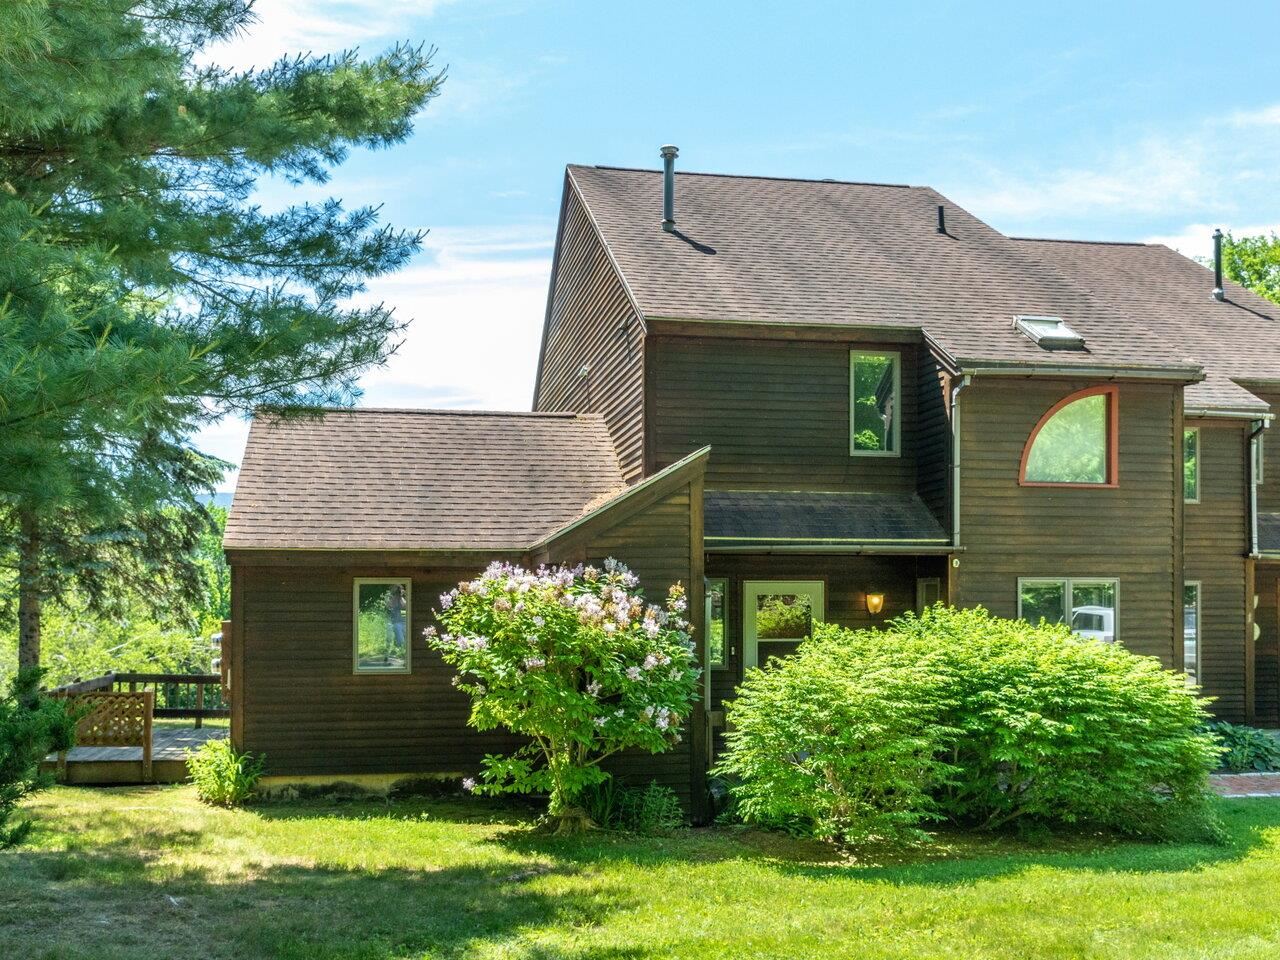 Sold property in Stowe